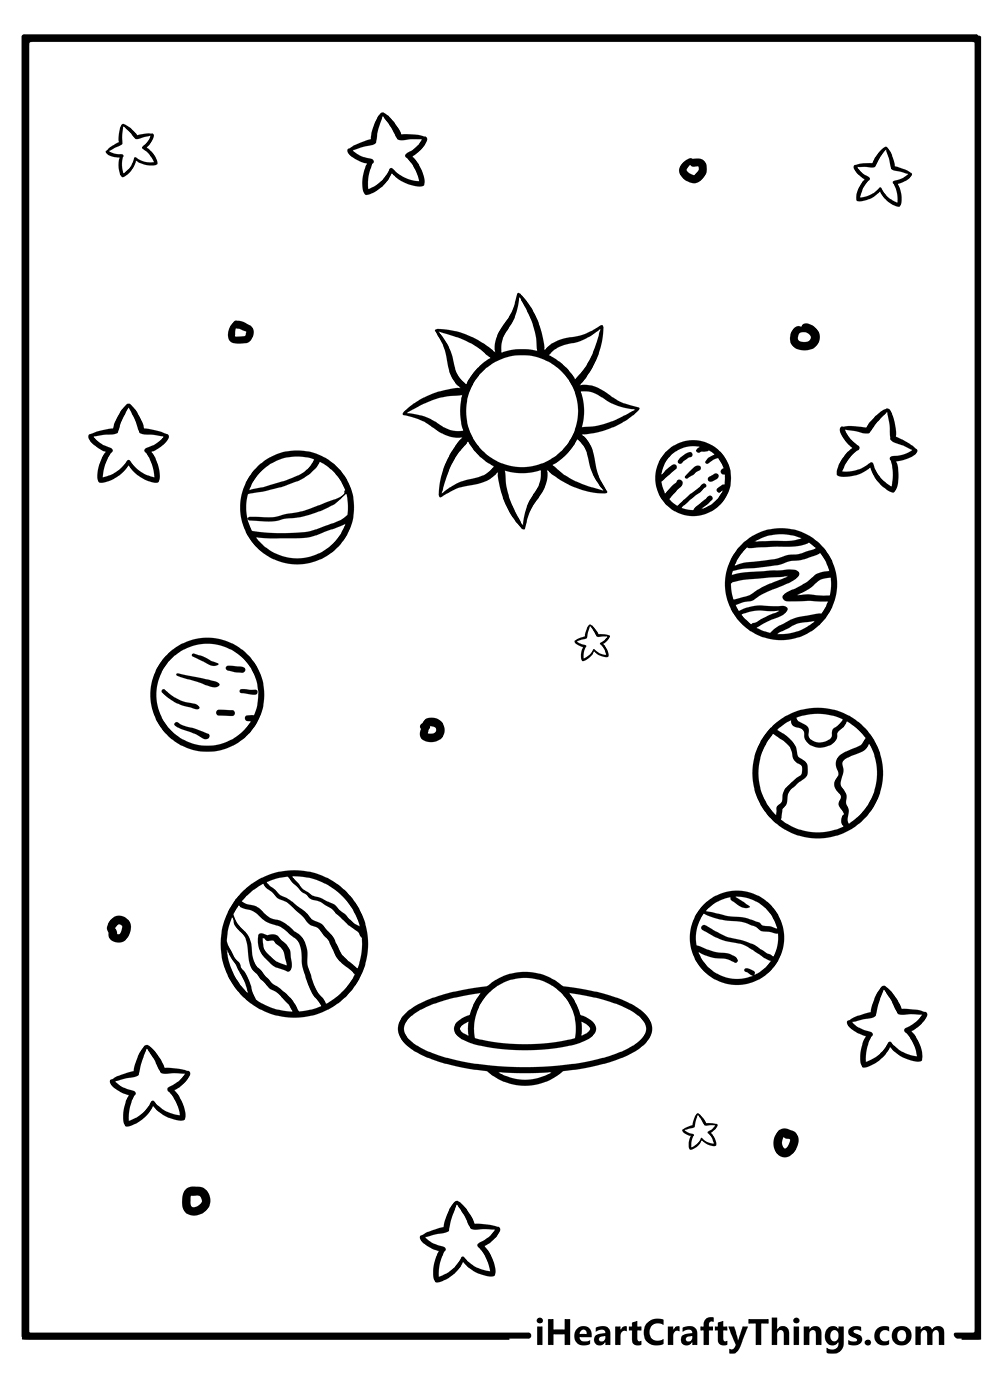 Solar System Coloring Book for adults free download